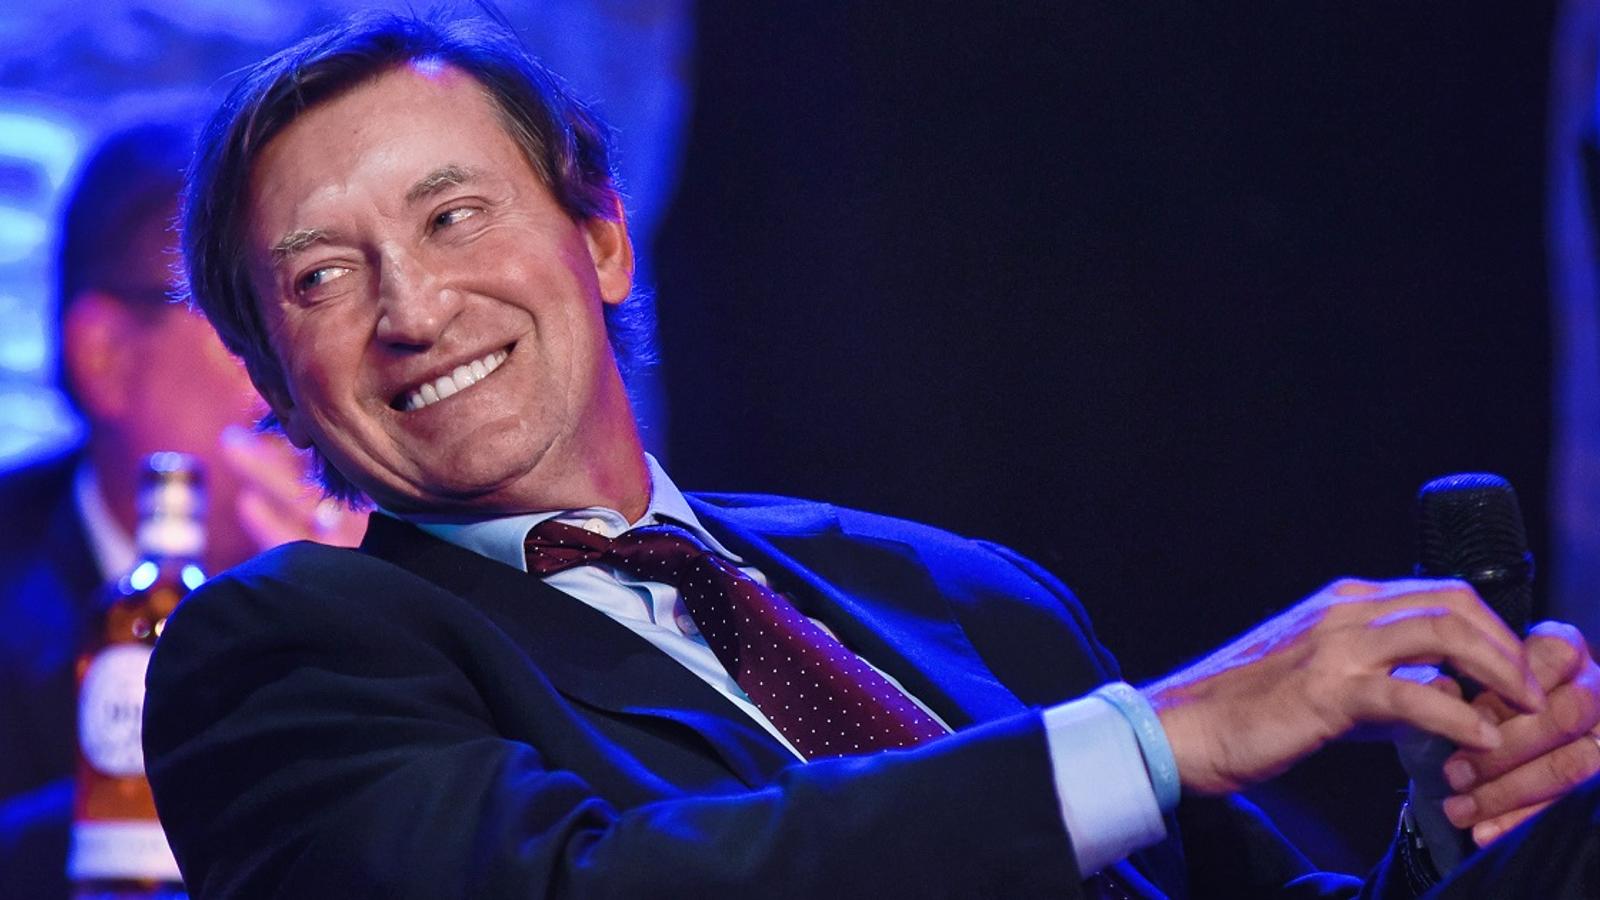 Wayne Gretzky names 3 cities that deserve an NHL expansion team.